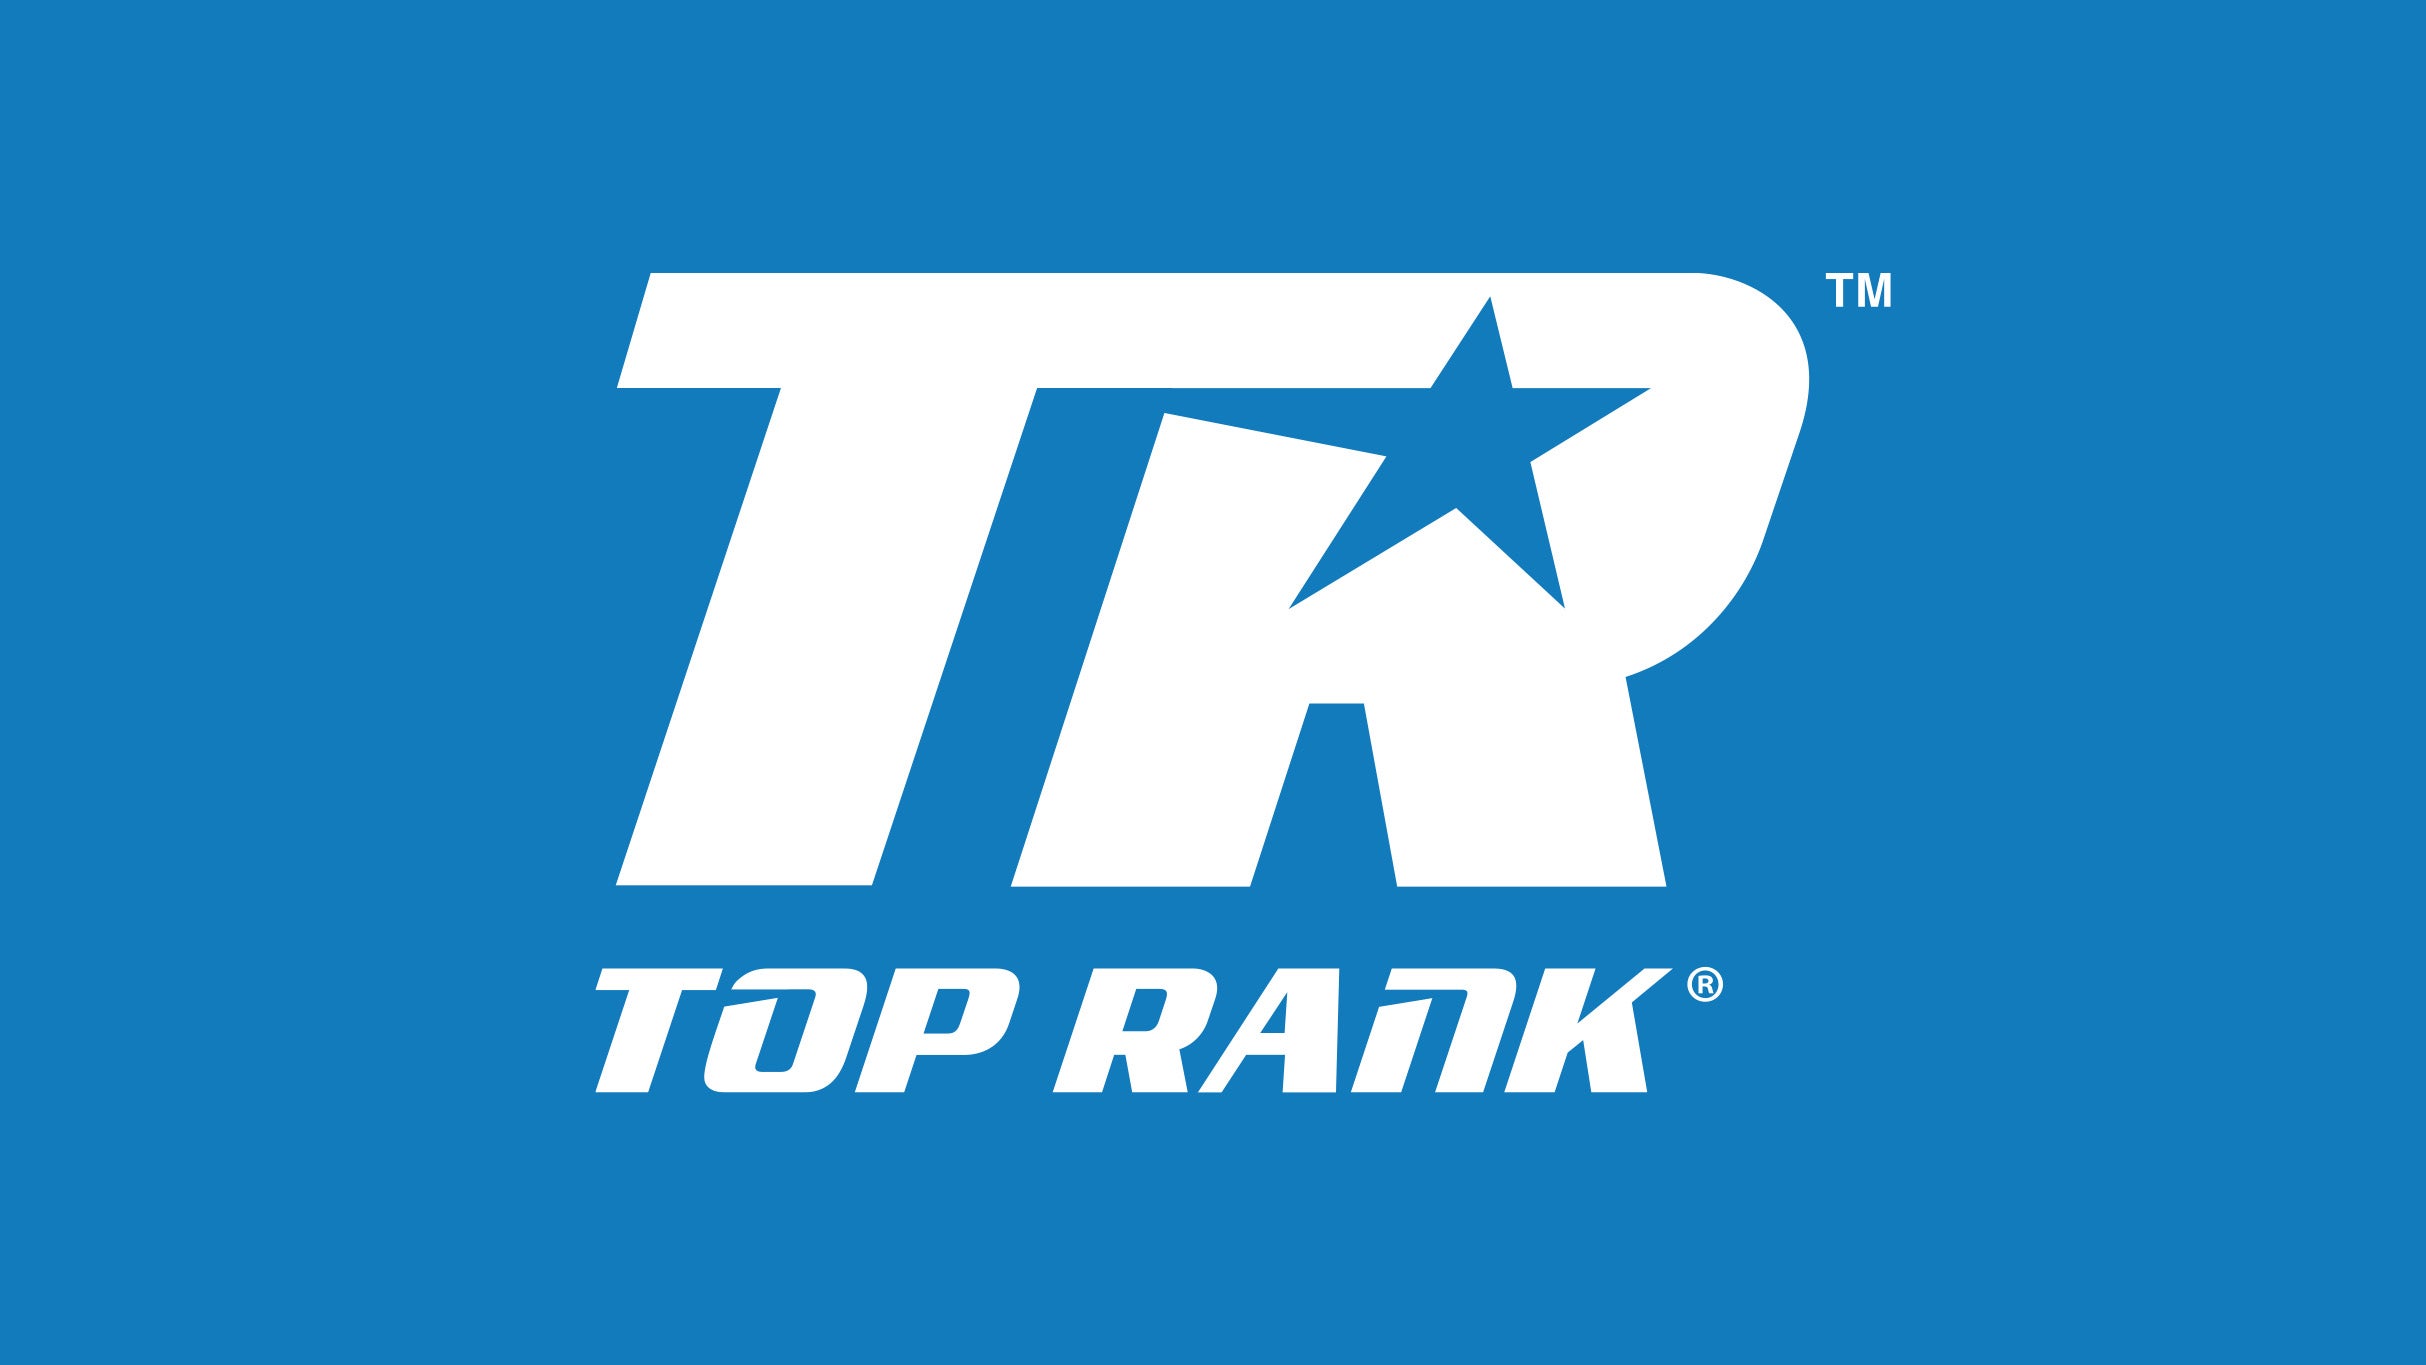 Top Rank Boxing: Taylor v. Lopez free presale password for early tickets in New York